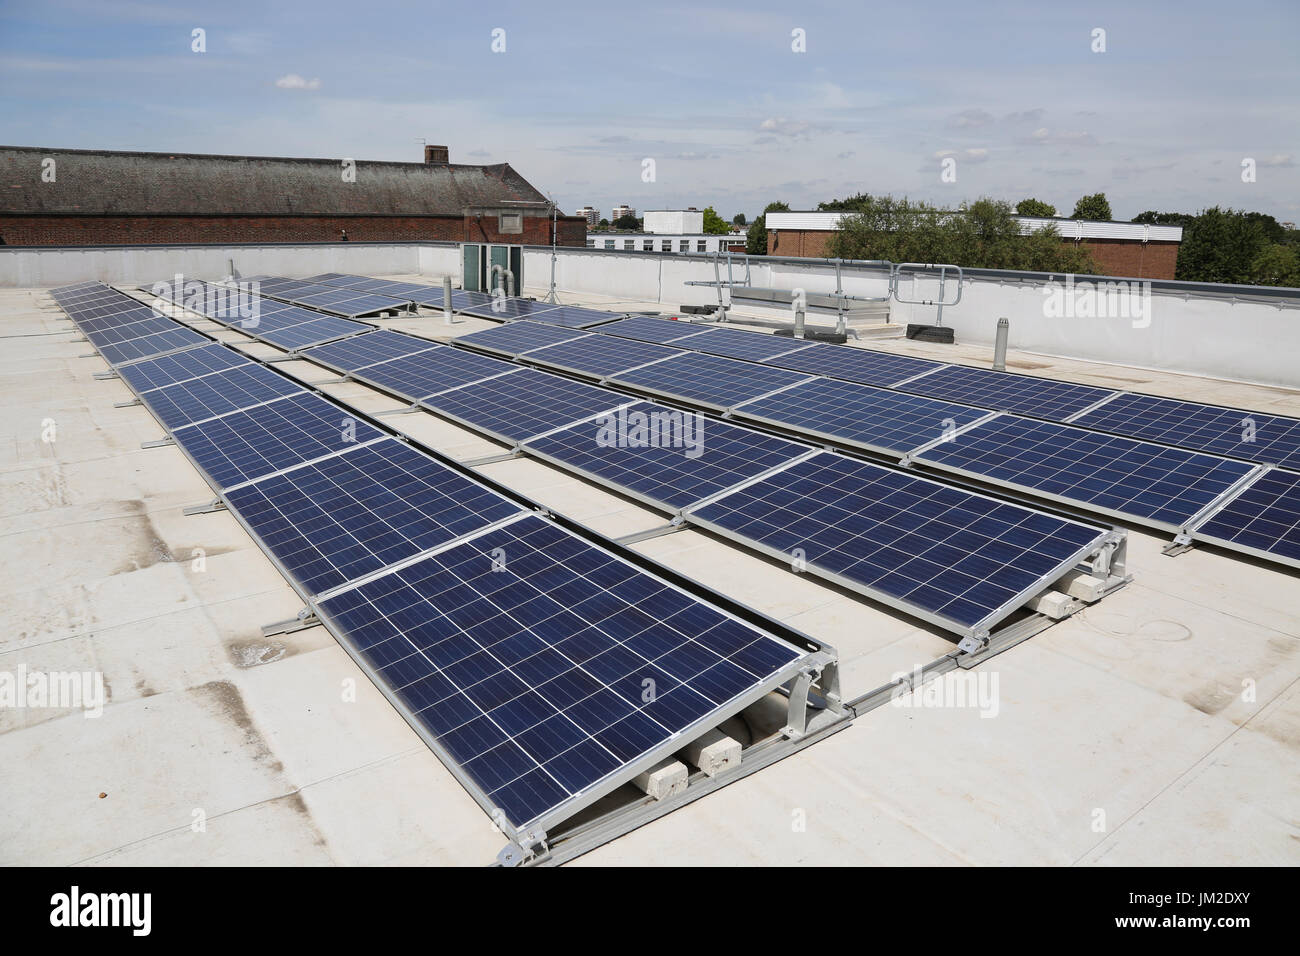 PV solar panels on the flat roof of a new primary school in Essex, UK Stock Photo